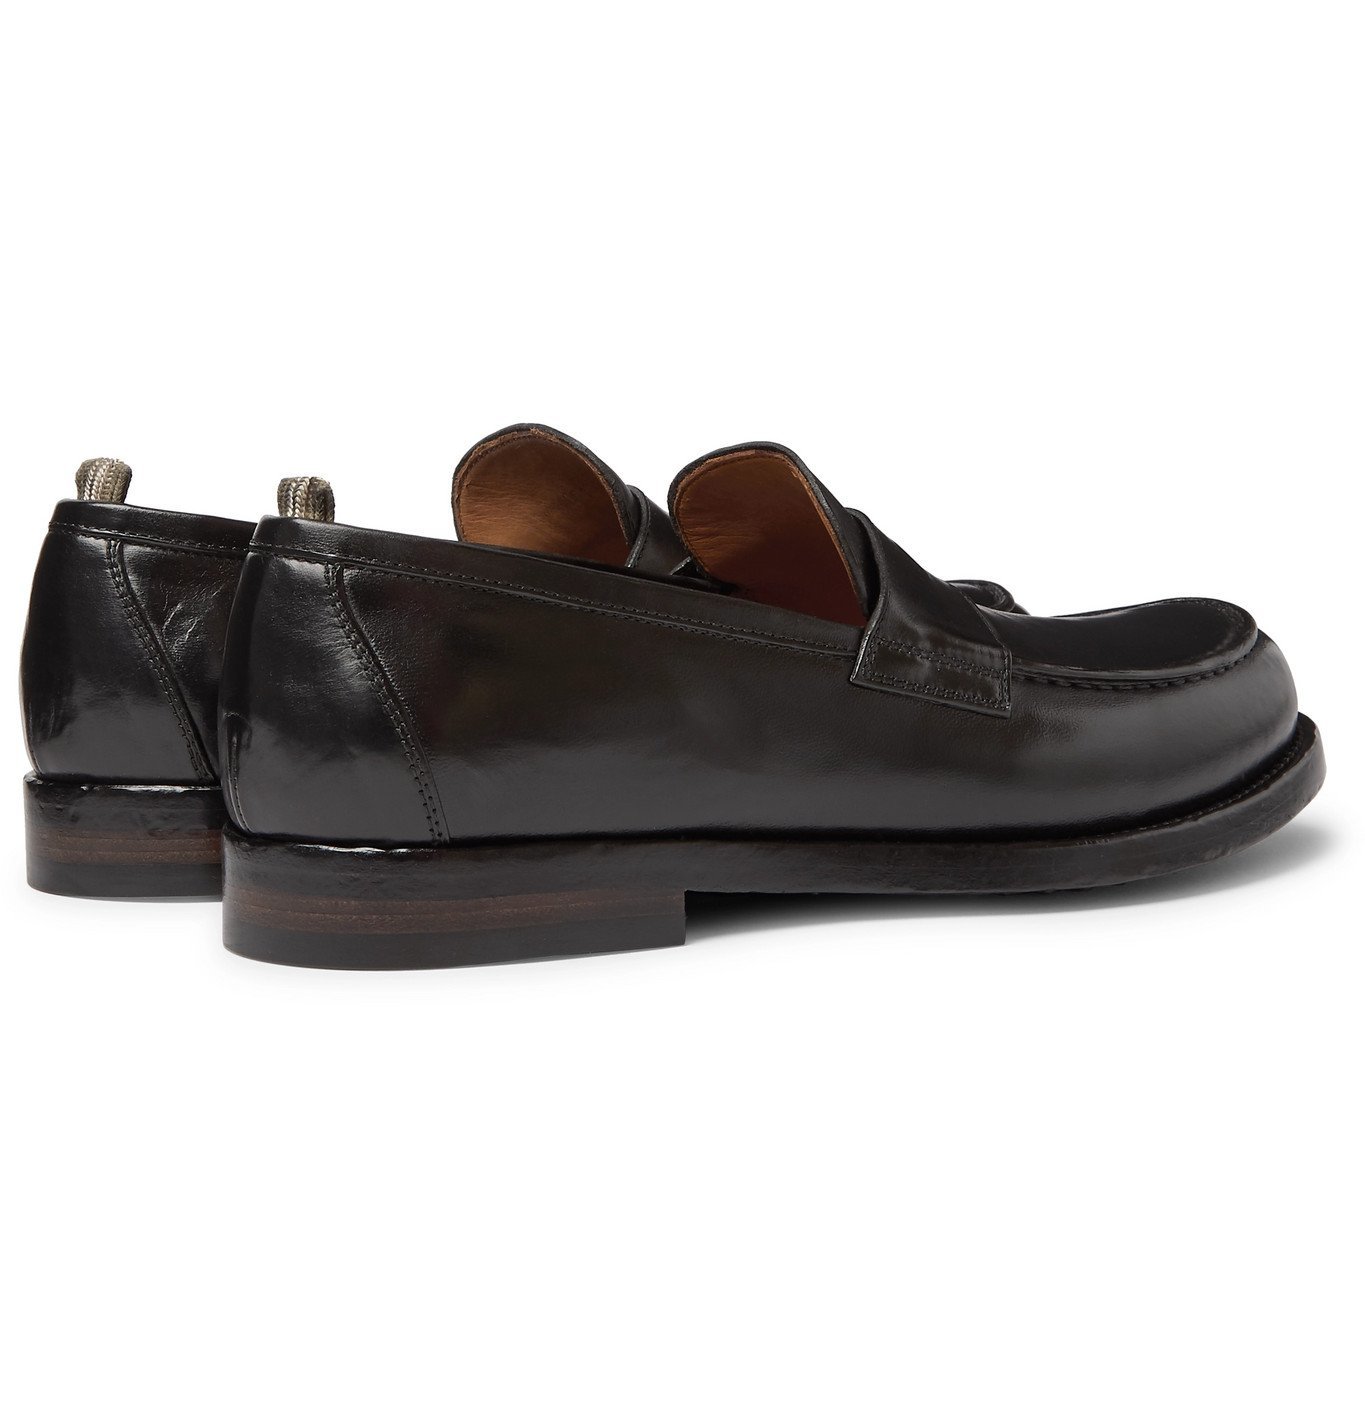 officine creative penny loafers